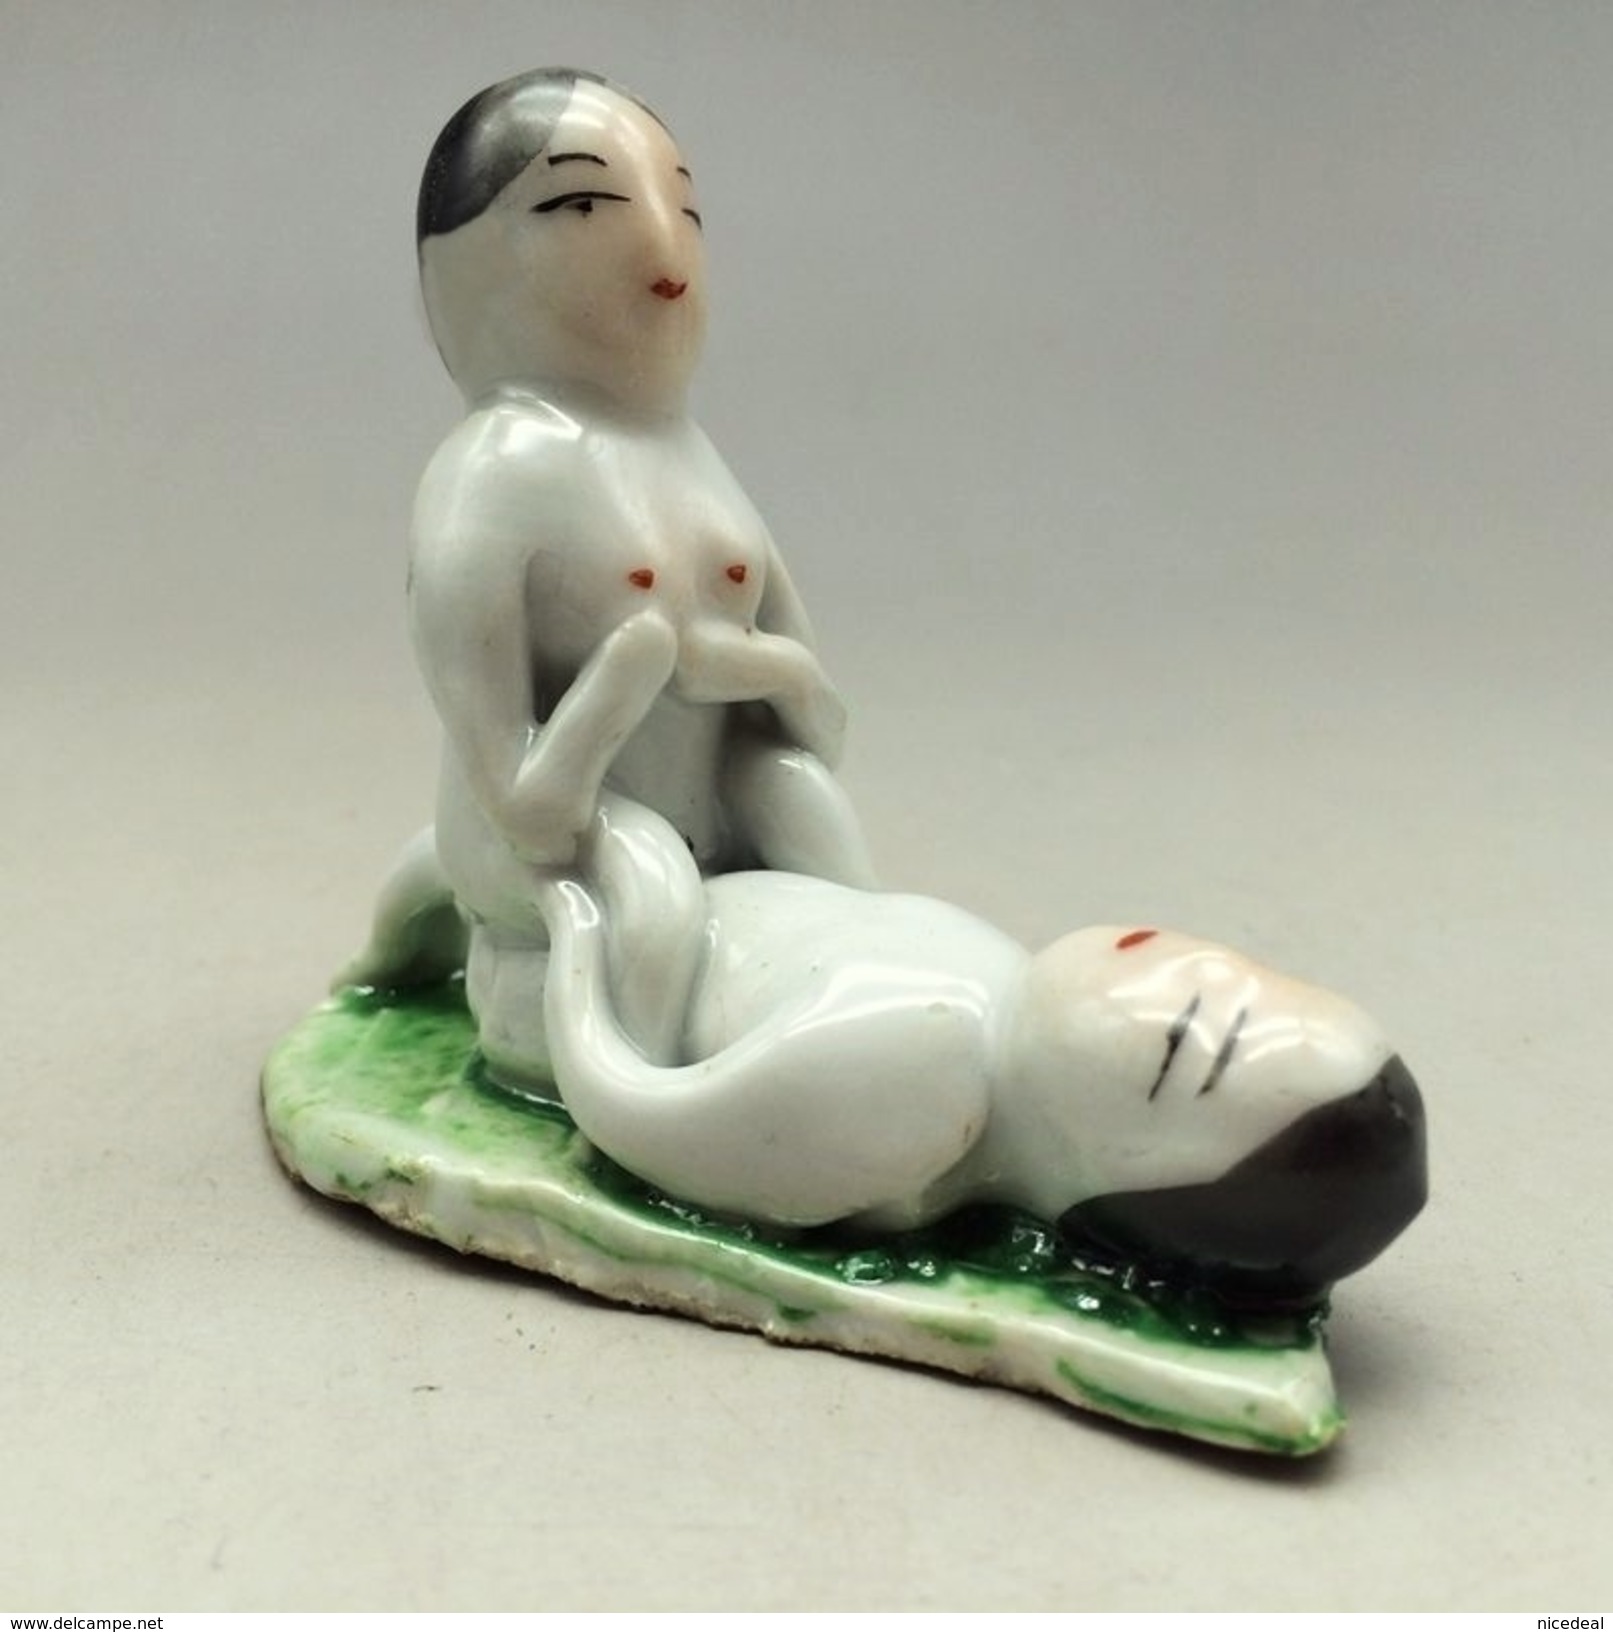 Figurine Statue Scene érotique Chinoise Couple Kamasutra Amour Sexe Chinese Man Woman Kama Sutra Love Erotic Position - Asiatische Kunst